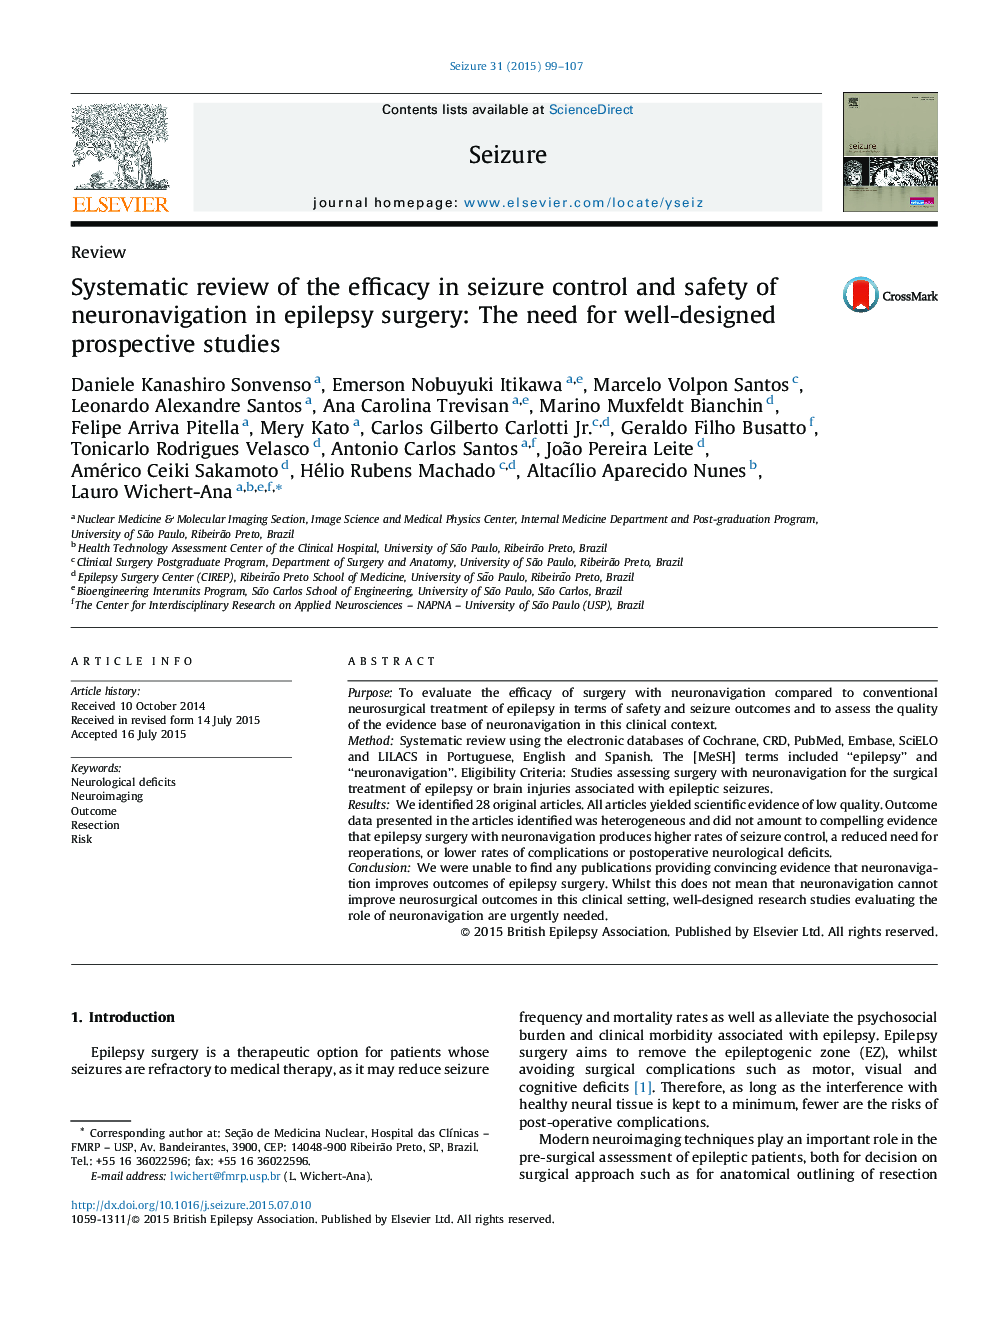 Systematic review of the efficacy in seizure control and safety of neuronavigation in epilepsy surgery: The need for well-designed prospective studies